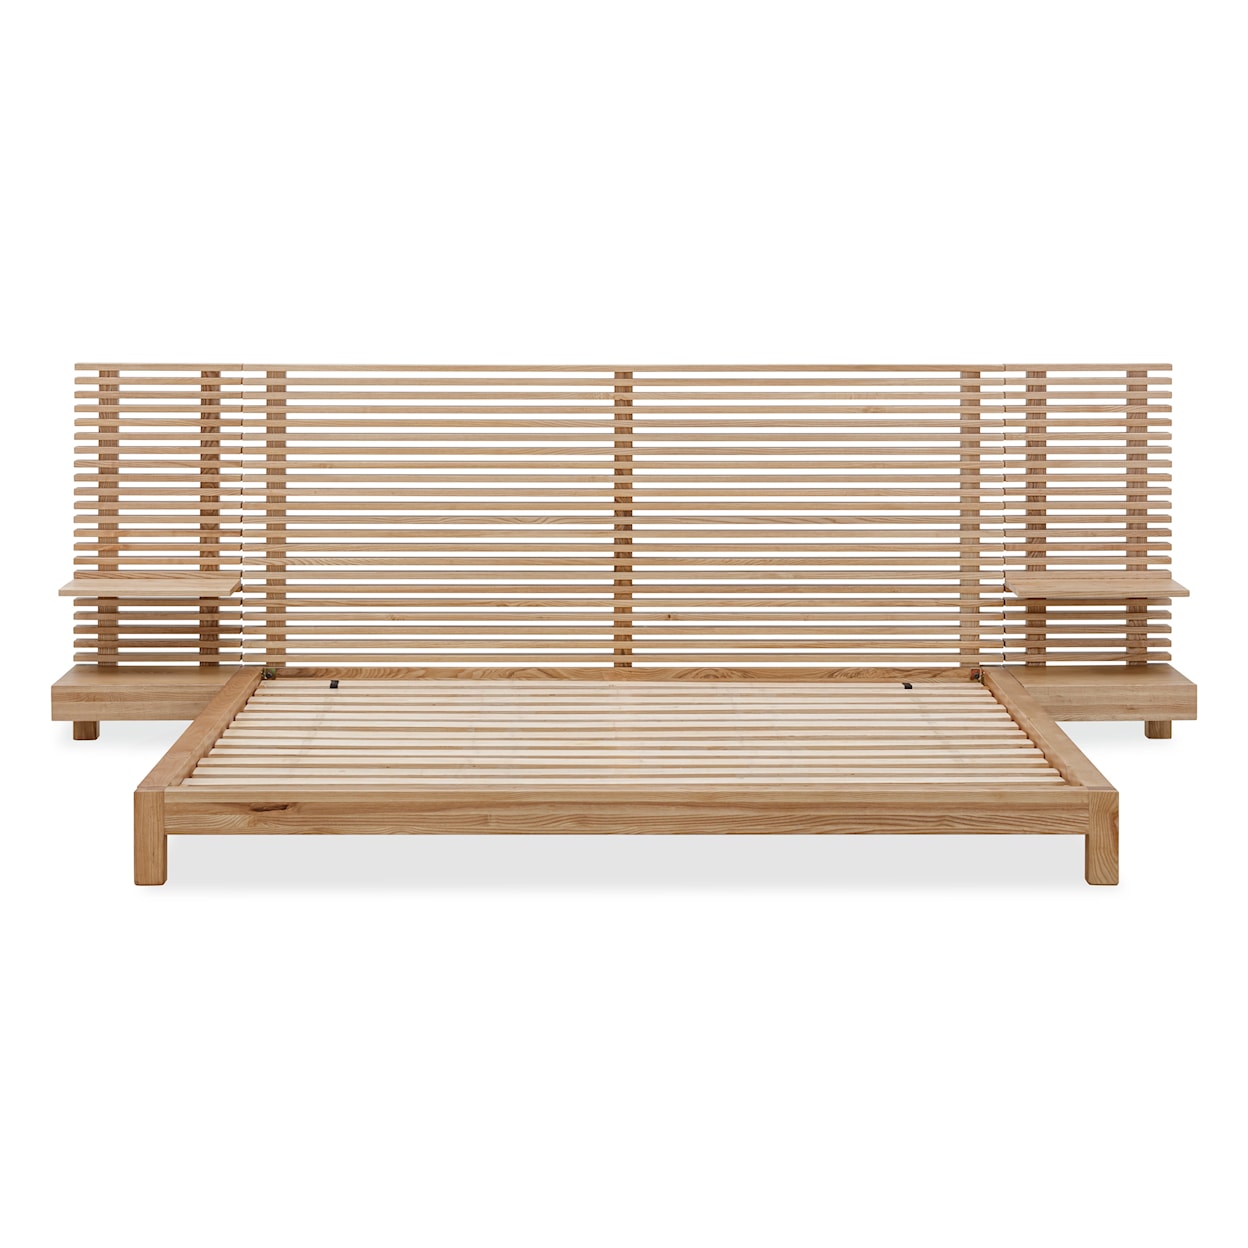 Modus International Tanner King Wall Bed